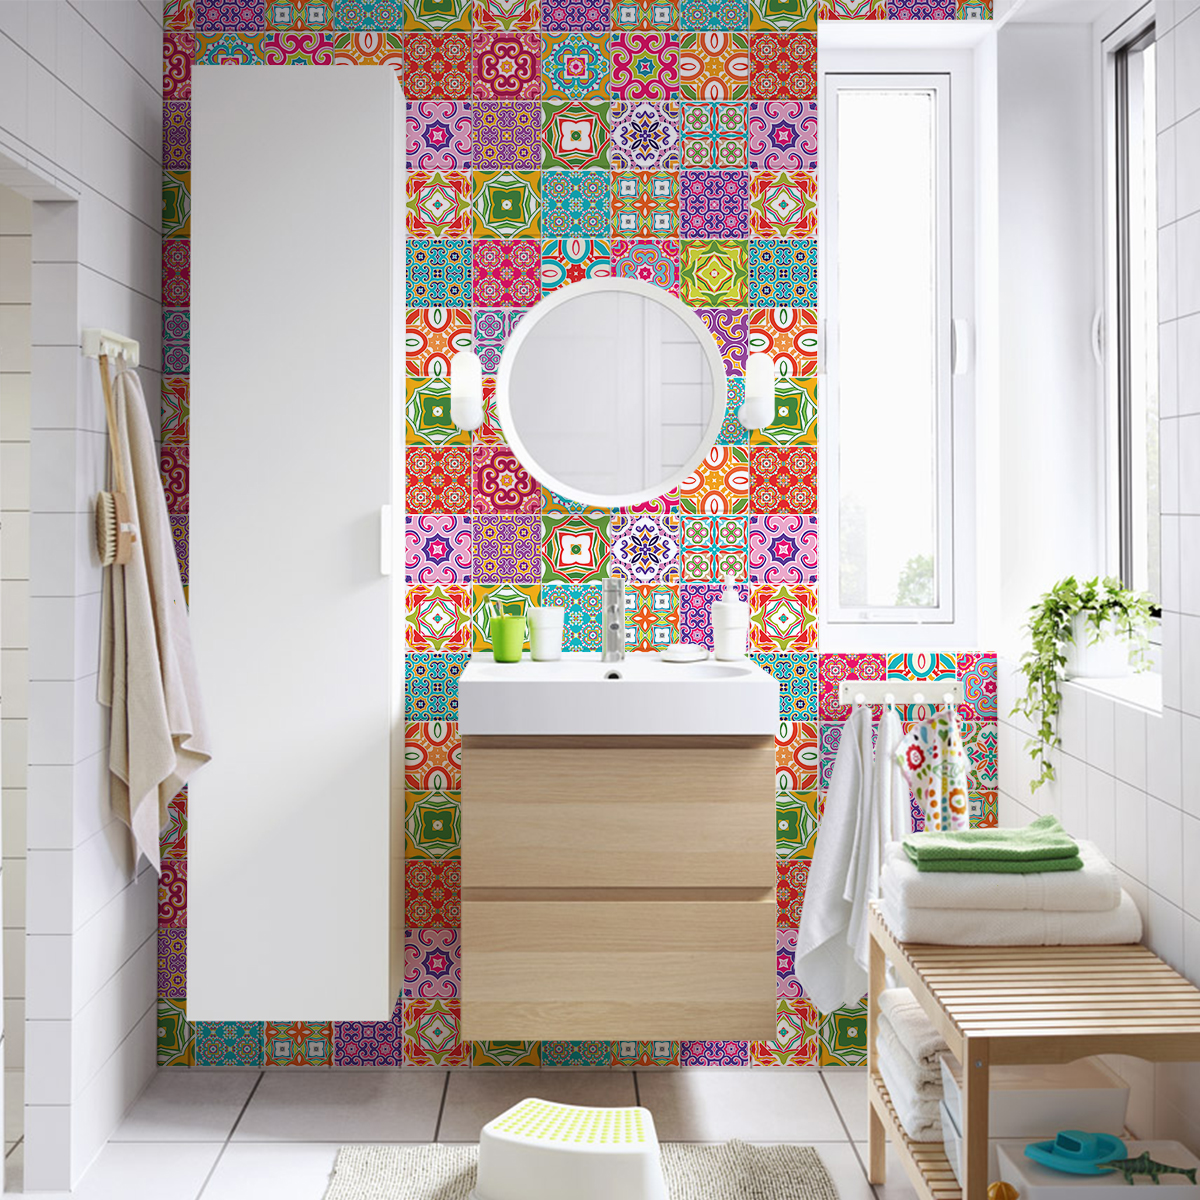 30 wall stickers cement tiles azulejos relina